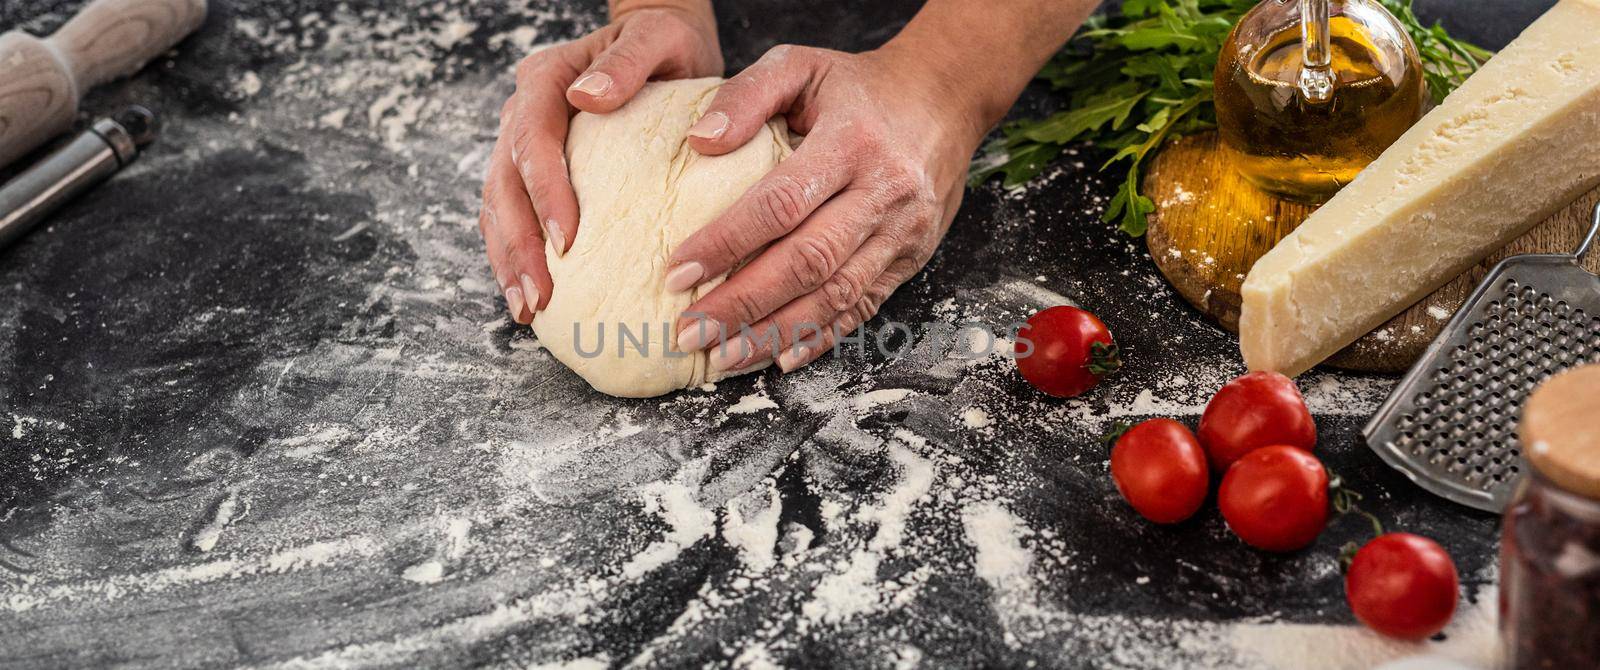 Top view of woman kneading dough for pizza baking on black floured background